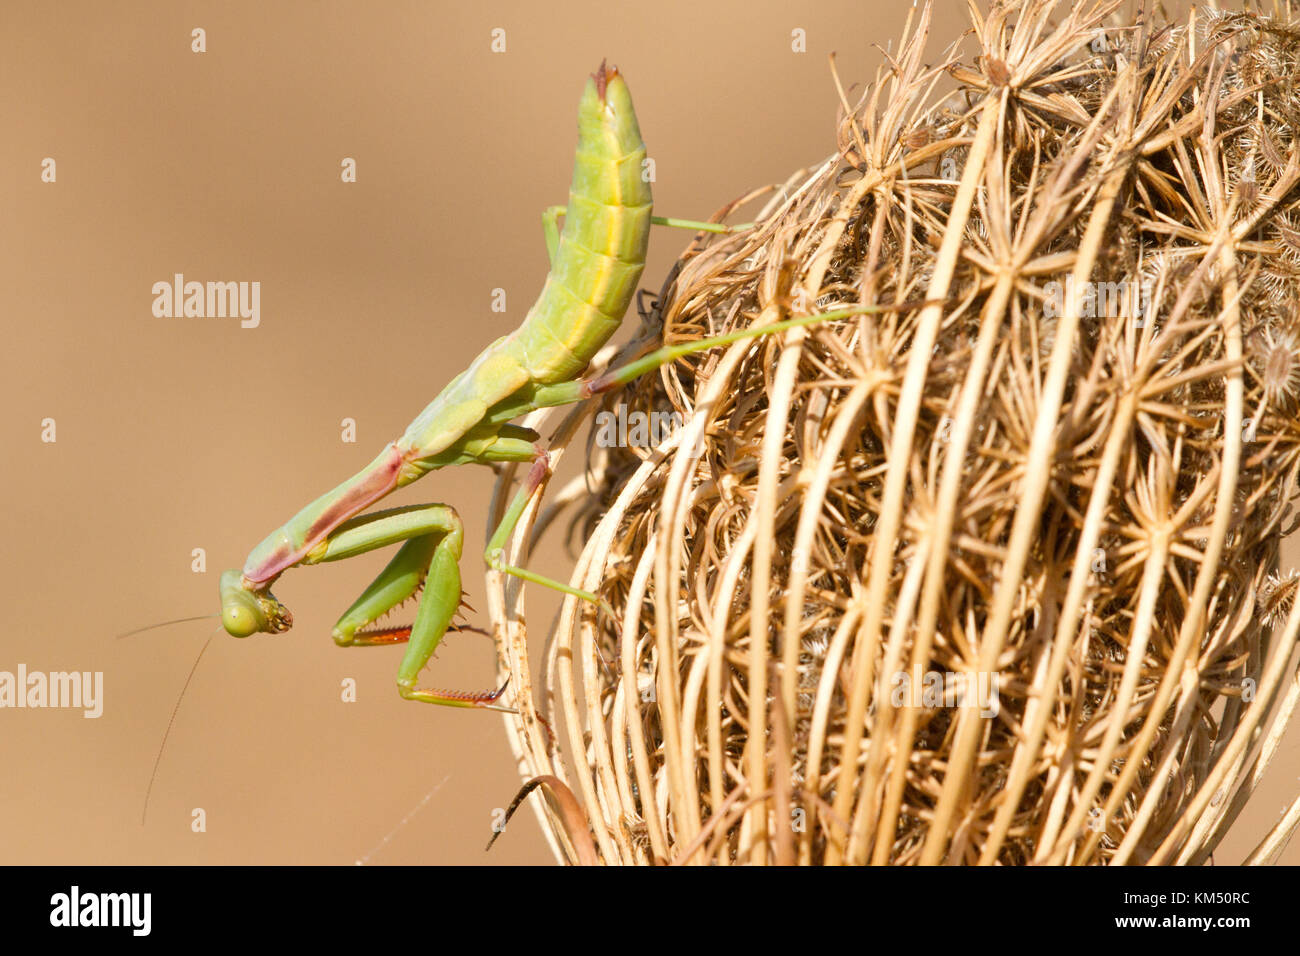 A nynph of a praying mantis (Mantis religiosa) is waiting for a prey on dead grass, Stock Photo